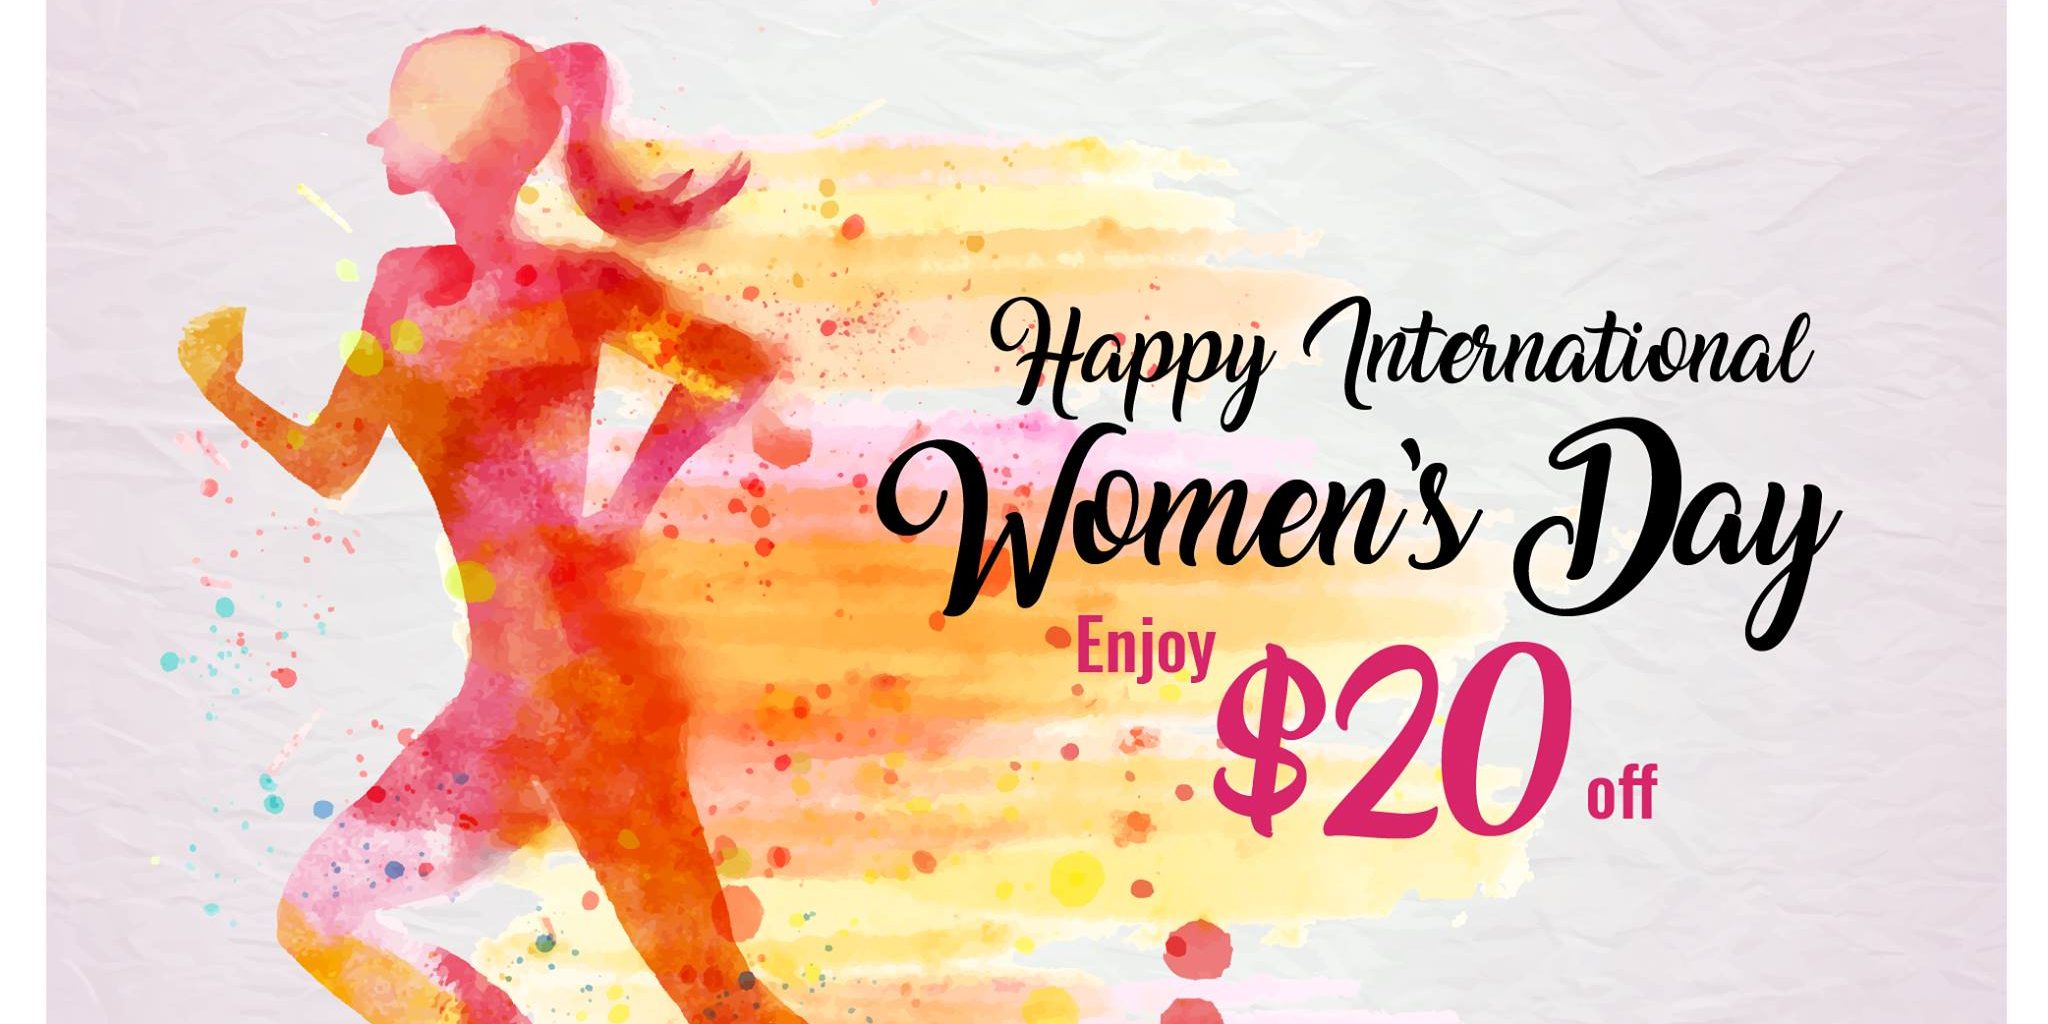 Income Eco Run Singapore Women’s Day $20 Off Promotion ends 8 Mar 2017